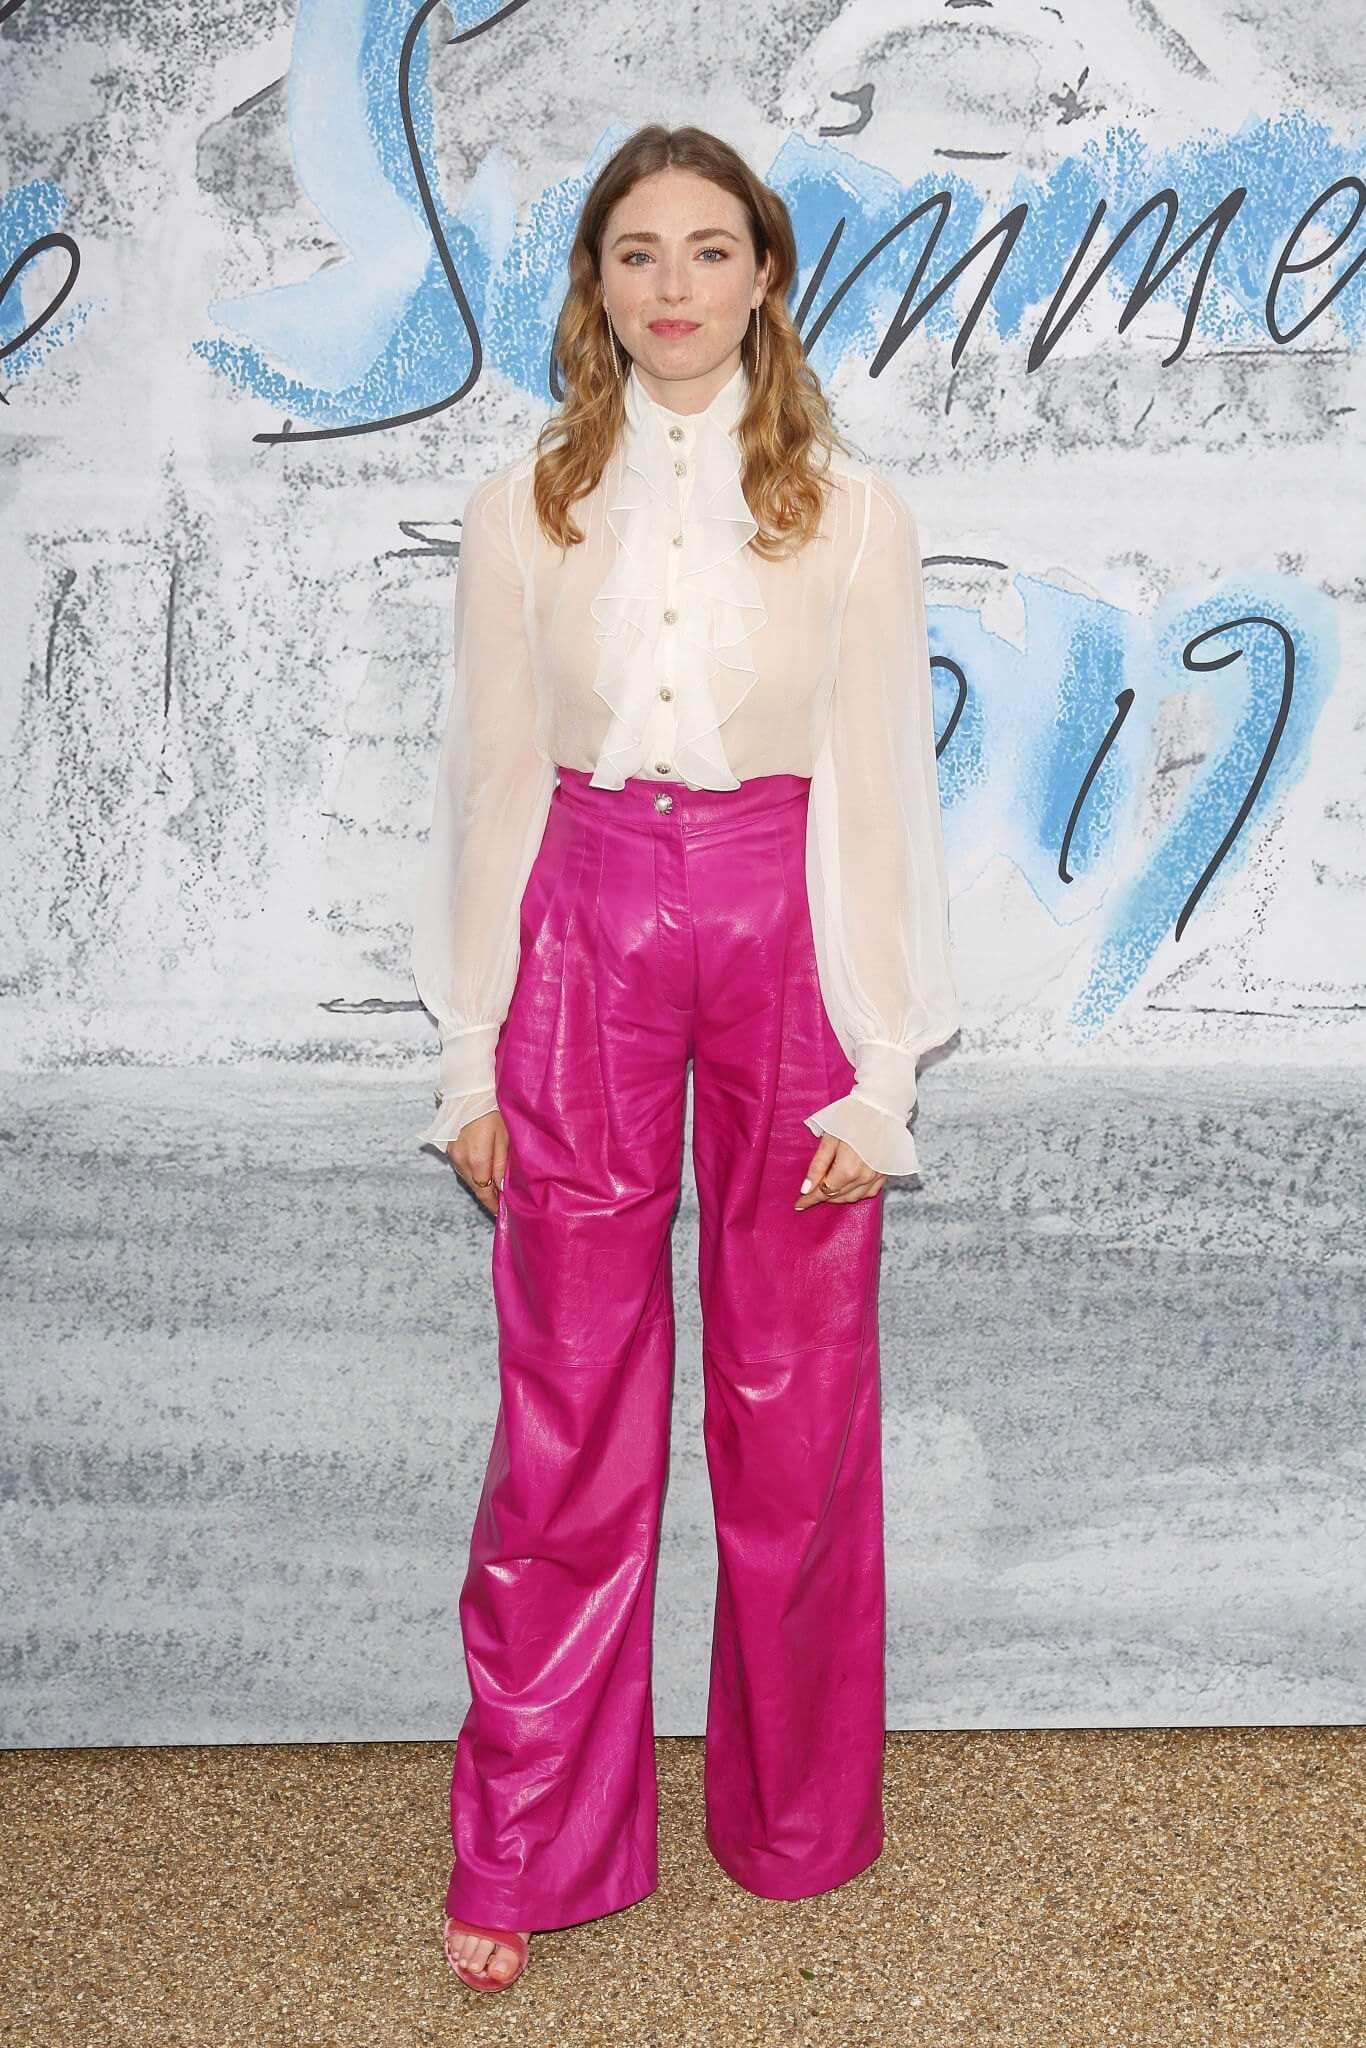 Freya Mavor In Beautiful White And Pink Combo Fit